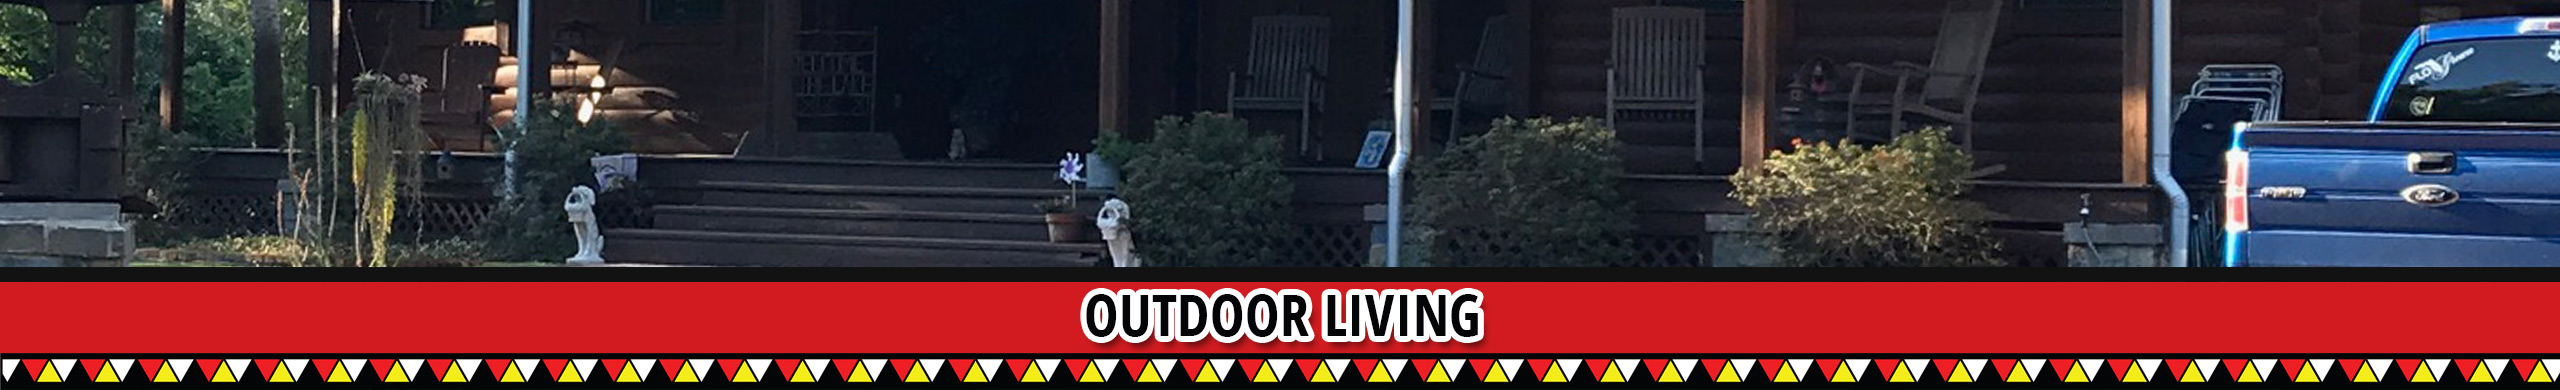 outdoor living page header